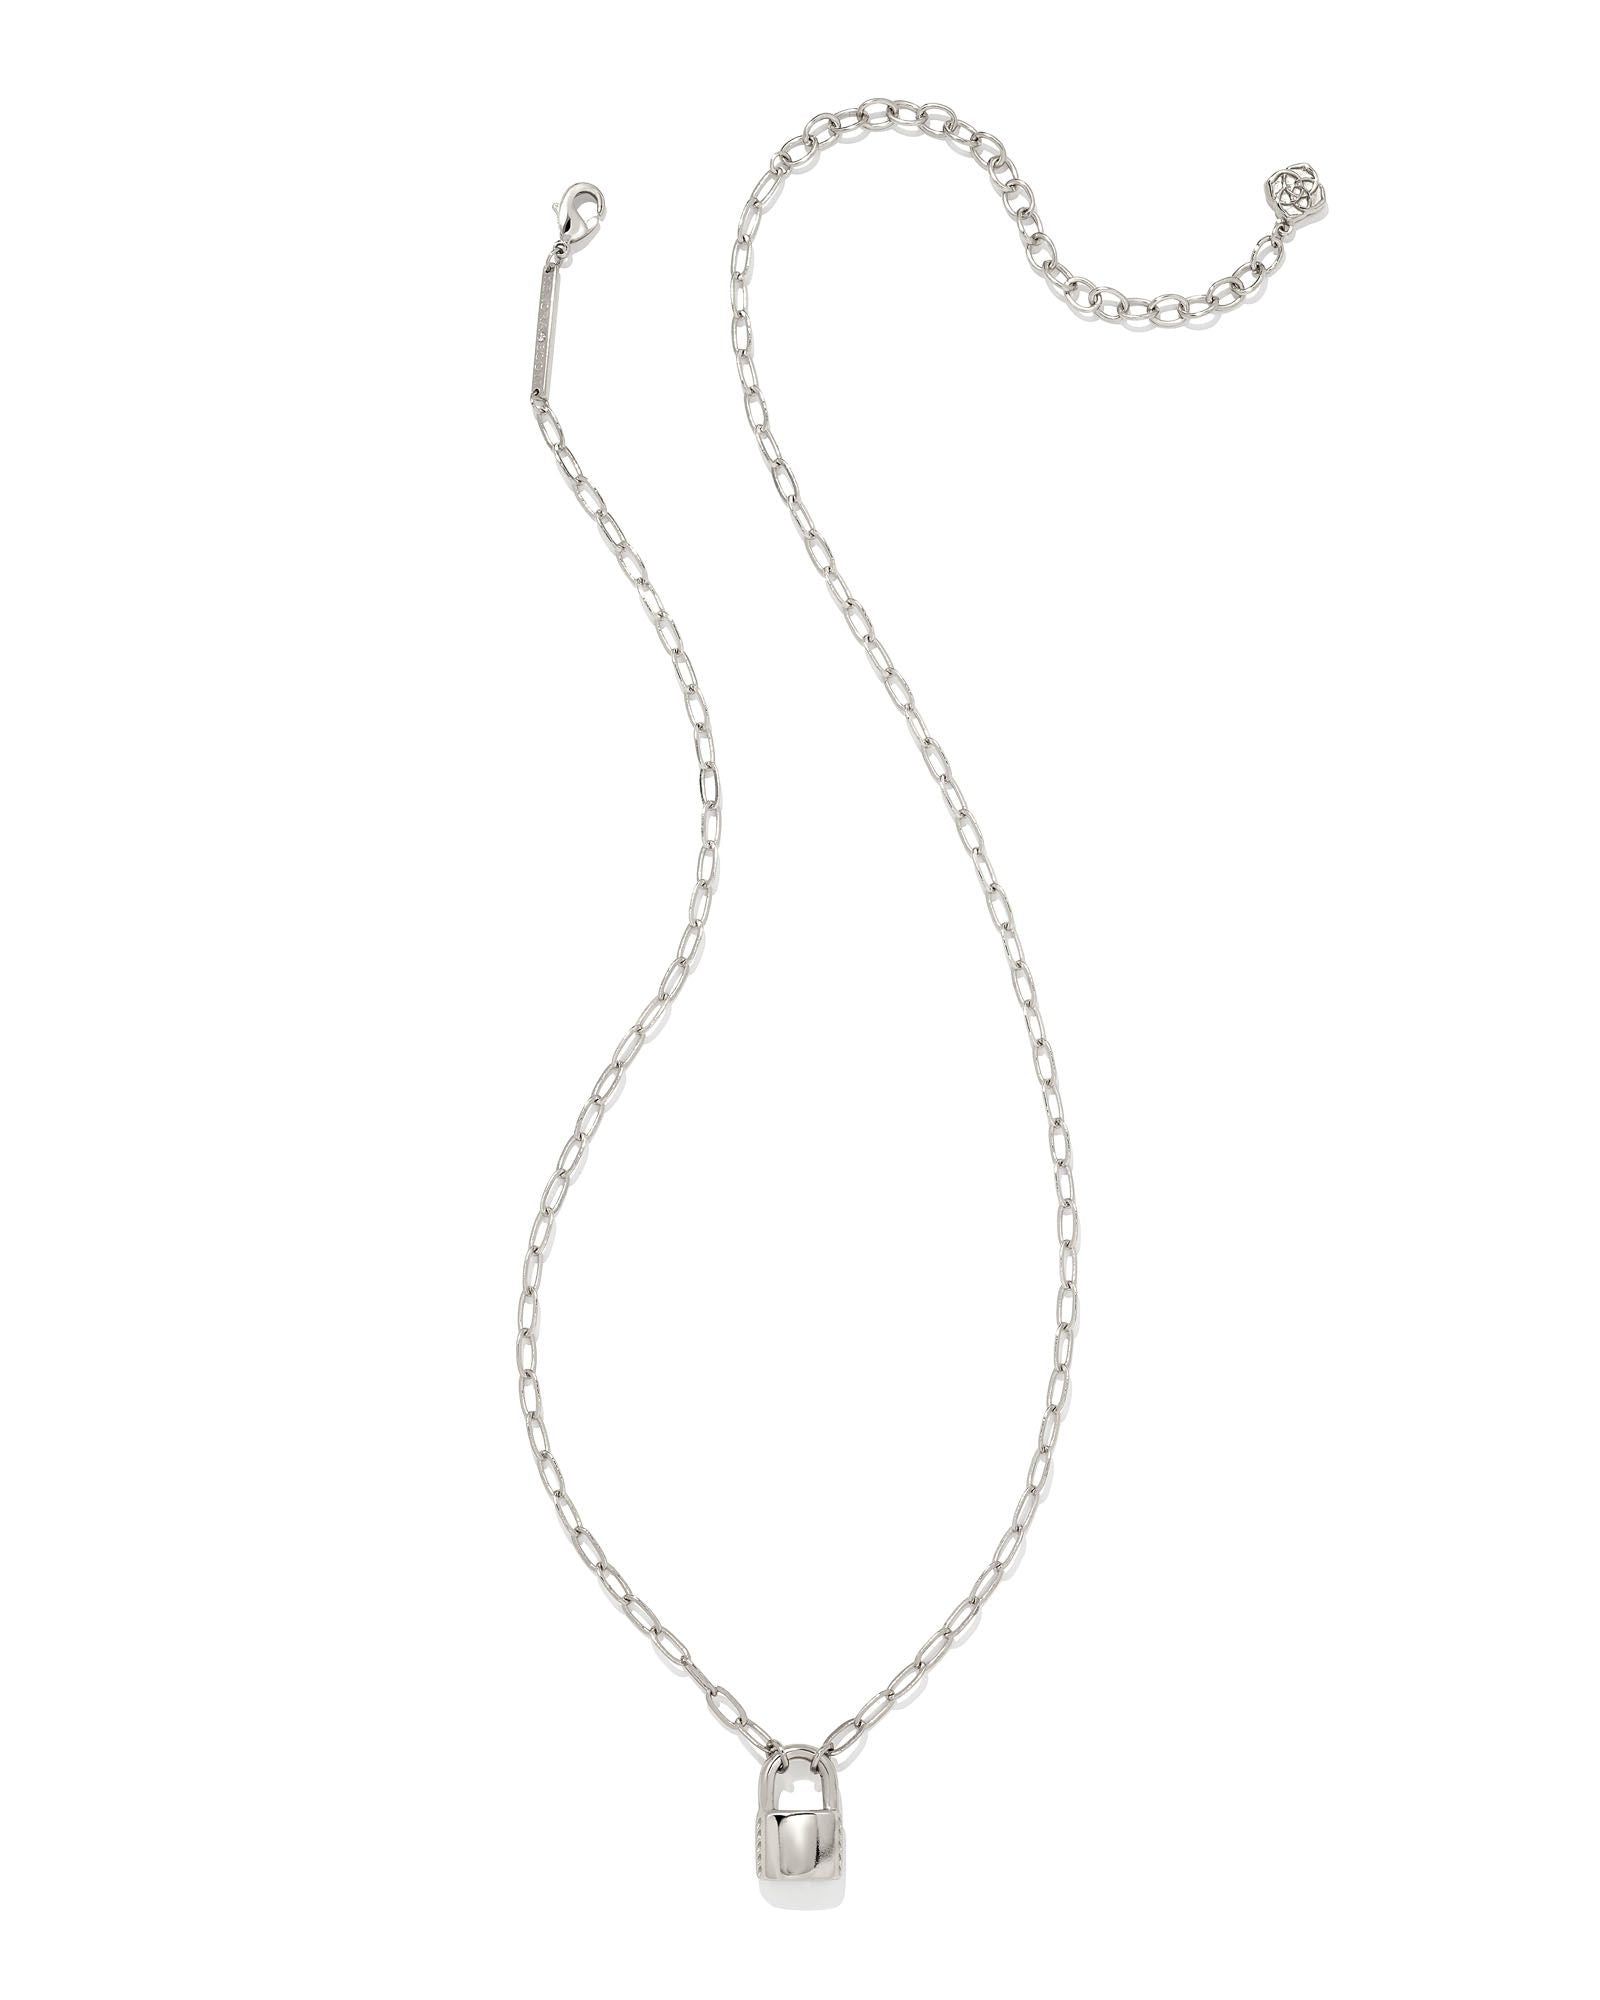 Kendra Scott Jess Small Lock and Chain Necklace Rhodium Metal-Necklaces-Kendra Scott-N1901RHD-The Twisted Chandelier